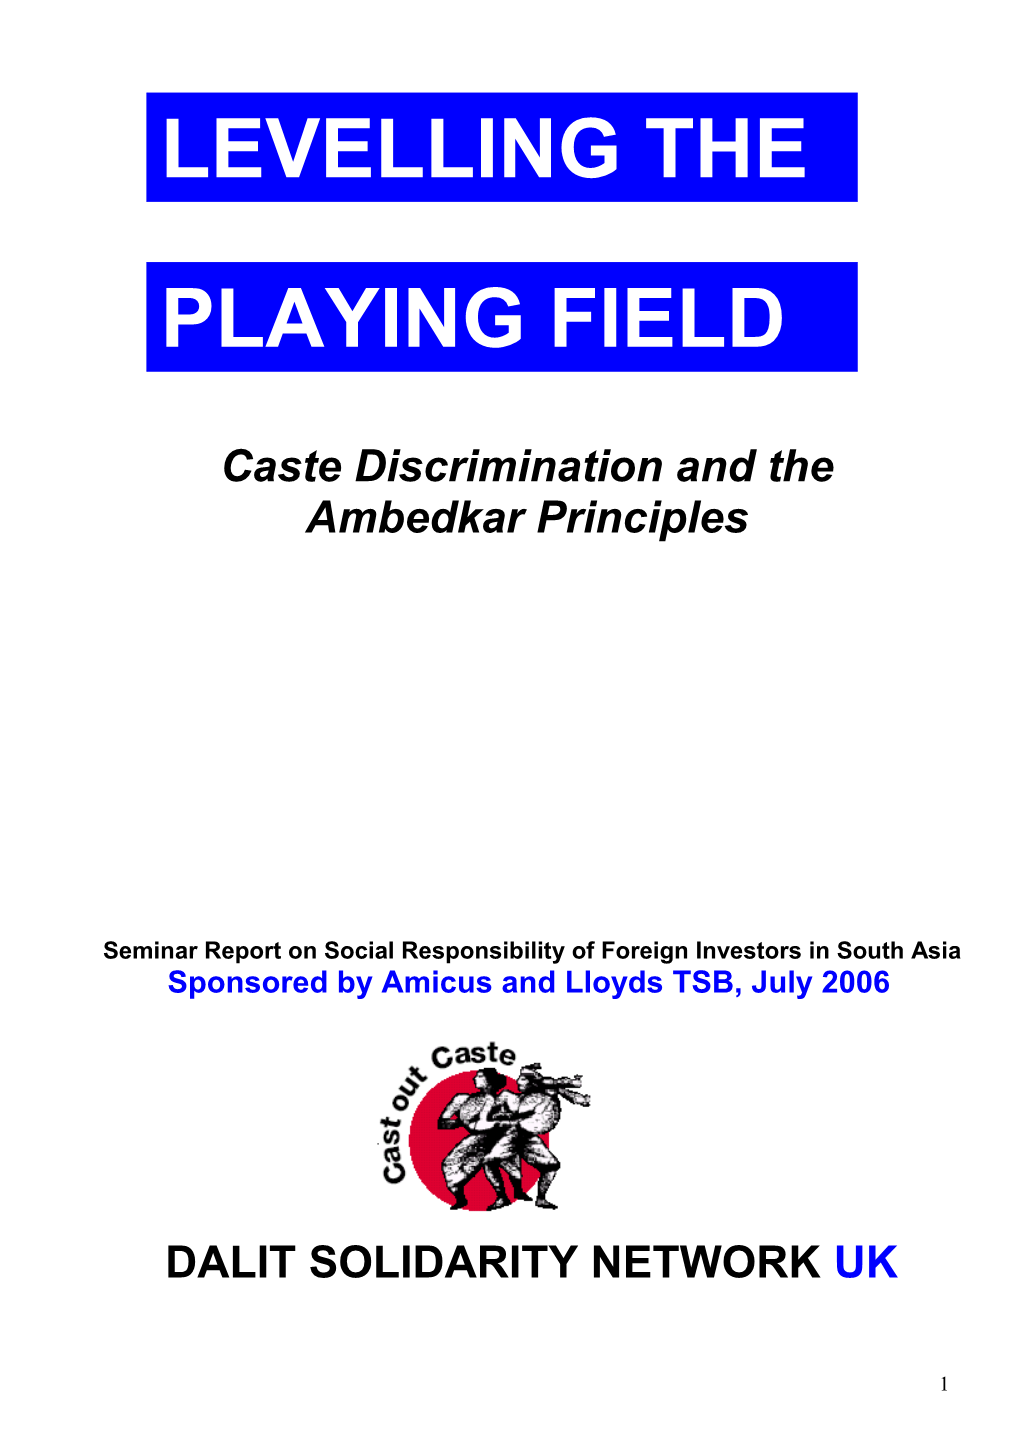 Caste Discrimination and The